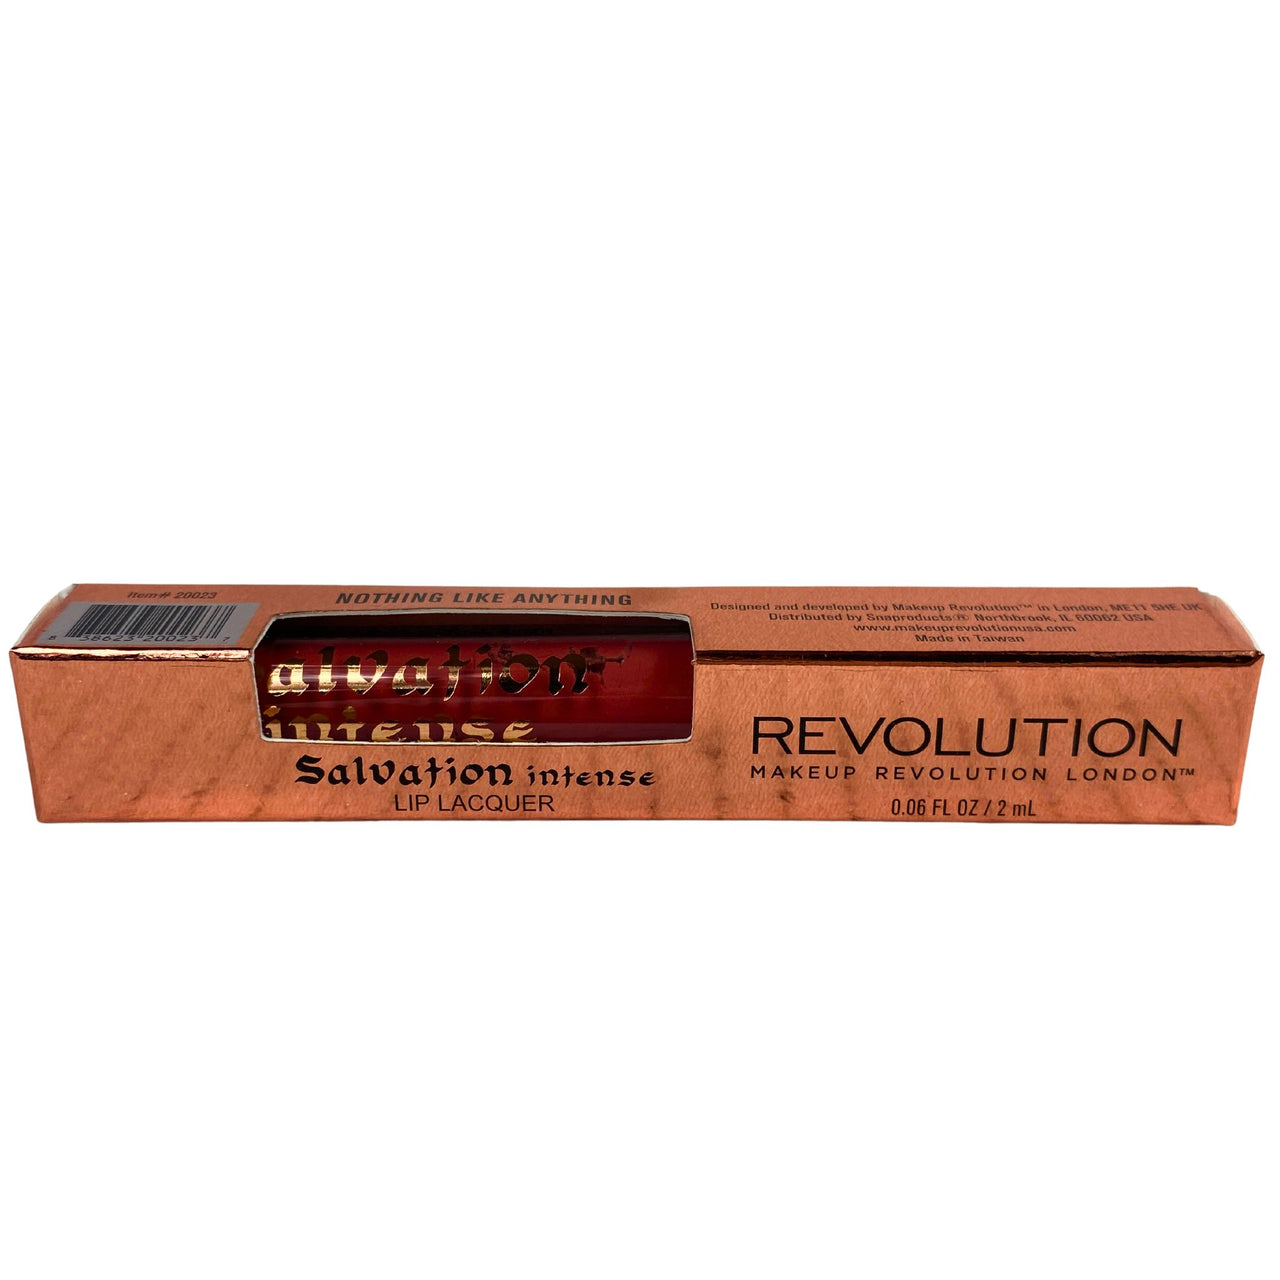 Revolution Salvation Intense Lip Lacquer NOTHING LIKE ANYTHING